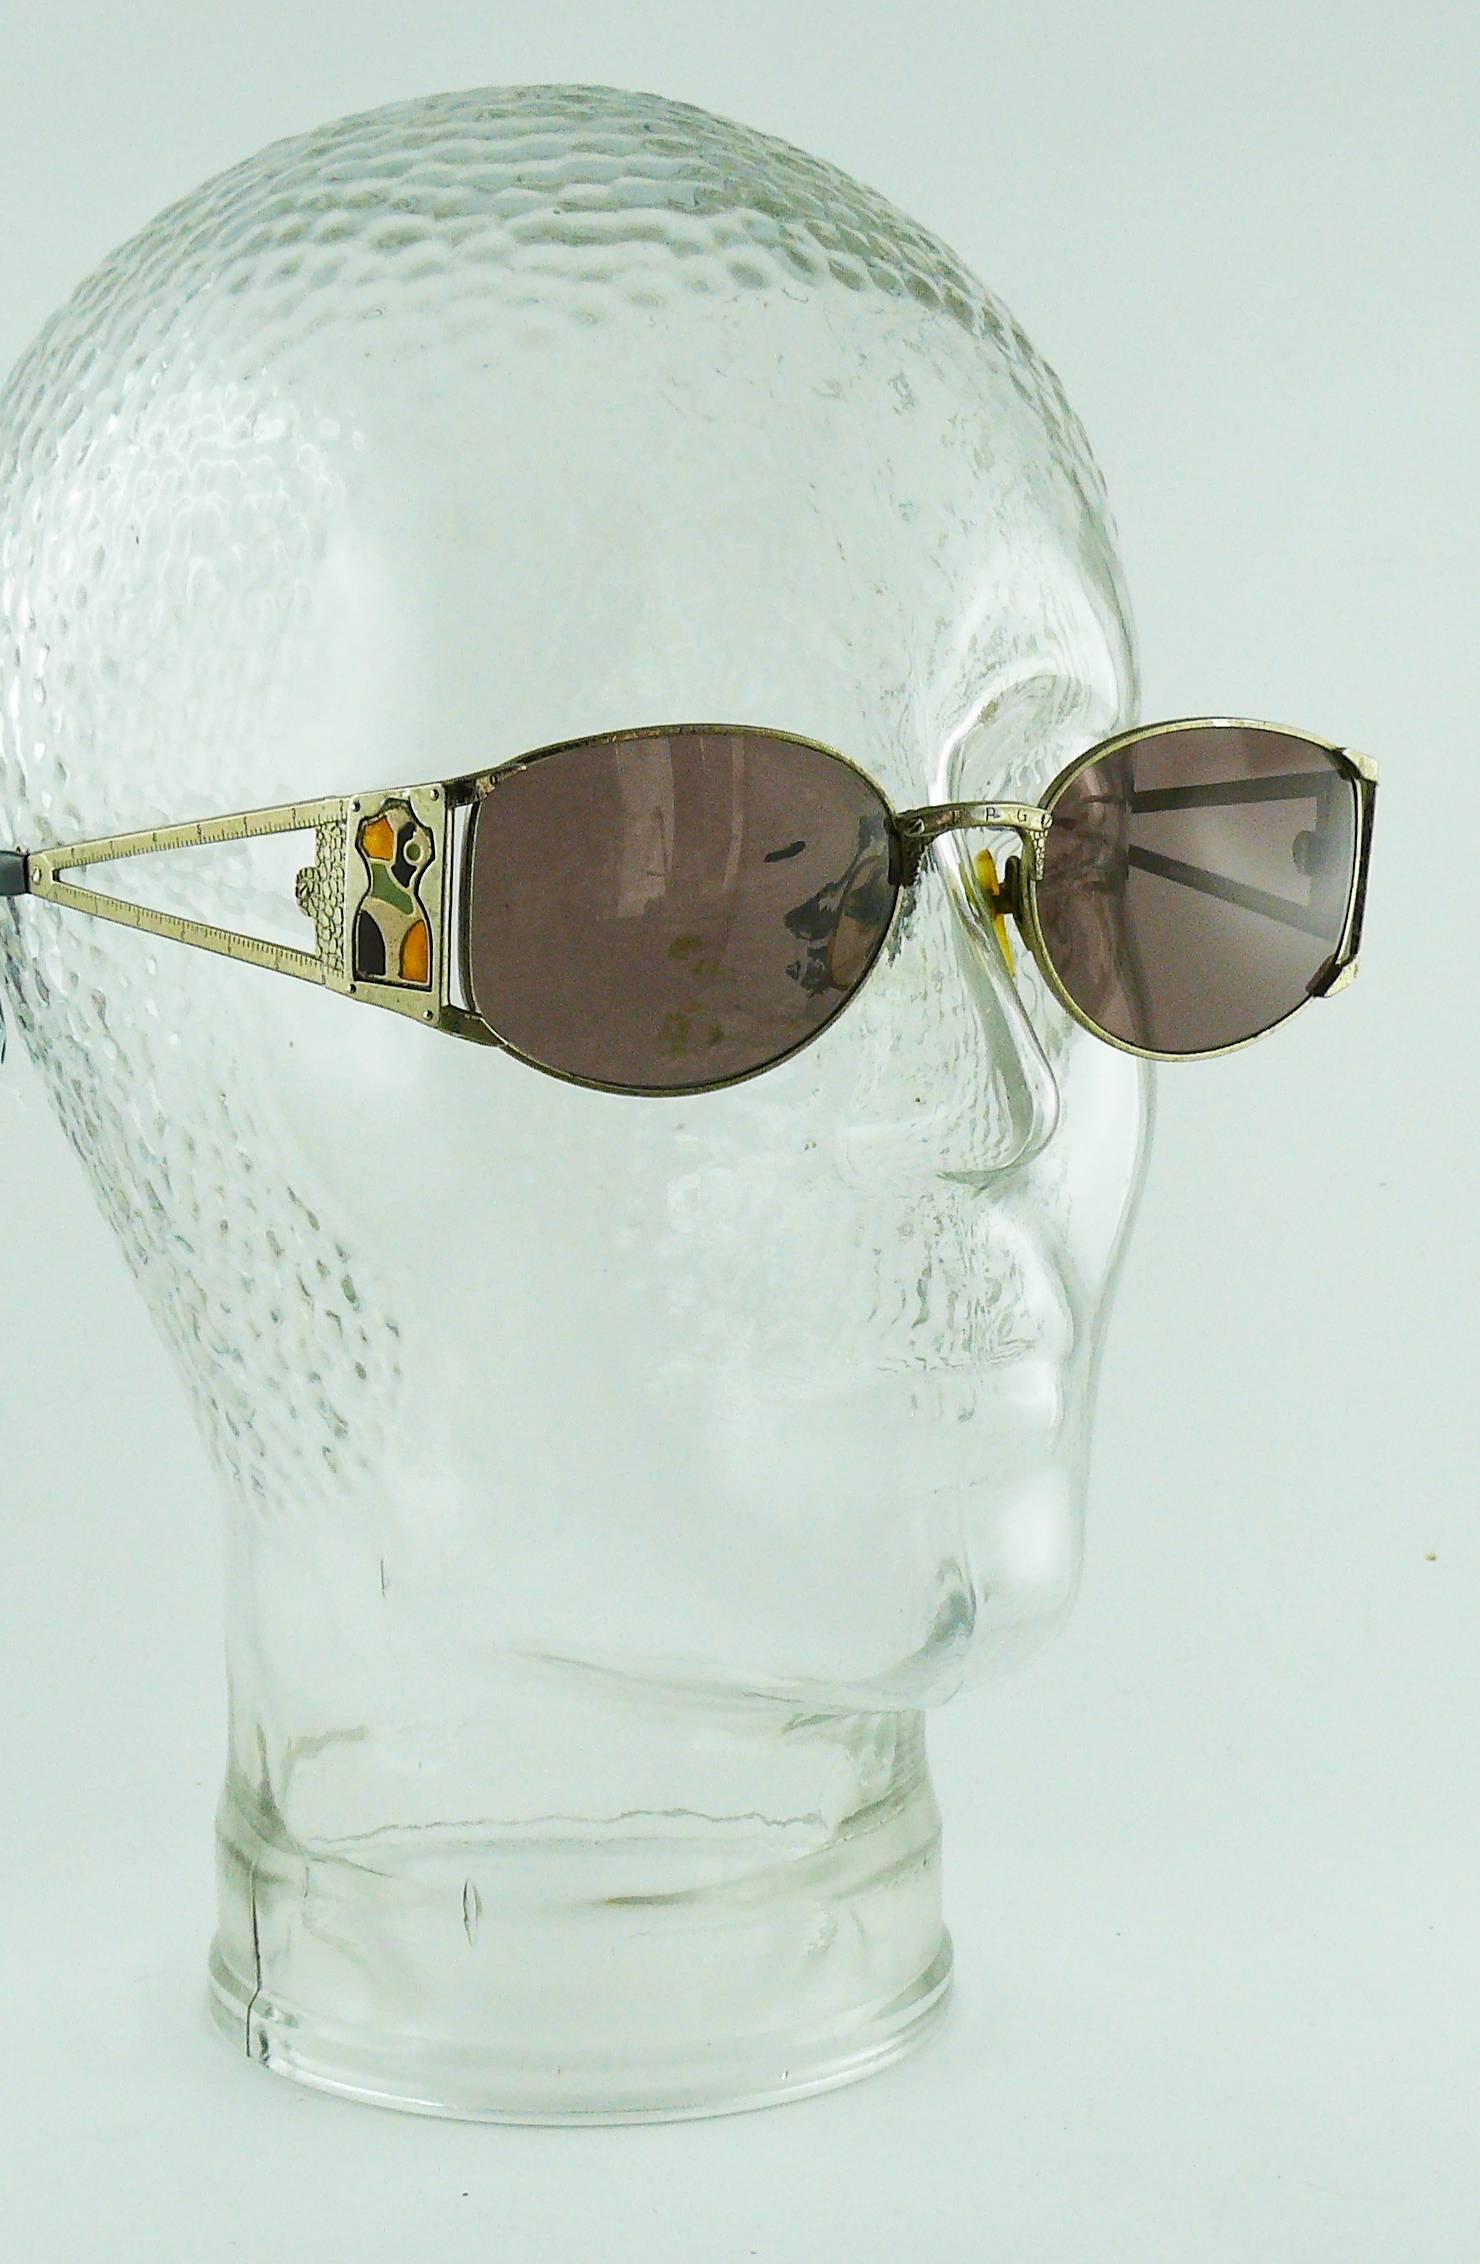 JEAN PAUL GAULTIER vintage sunglasses featuring enameled iconic bustiers on both sides.

Grained gun patina silver tone frame.
Temples with ruler design.
Tinted lenses.

Embossed JPG.
Made in Japan.

Indicative measurements : max. width approx. 13.8